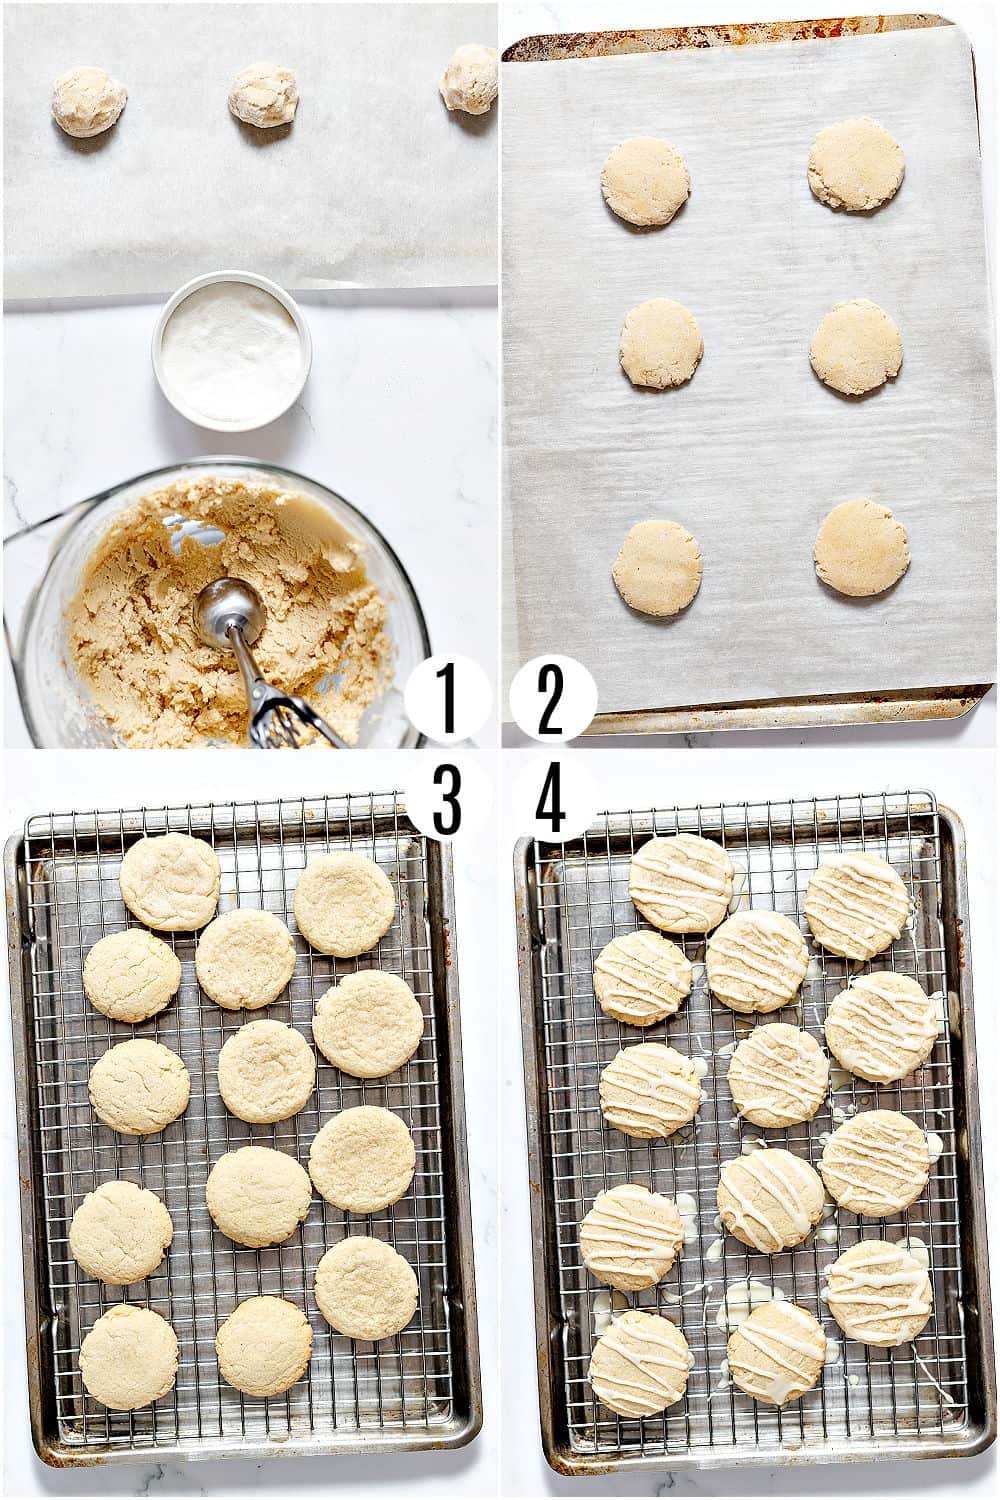 Step by step photos showing how to make eggnog cookies.